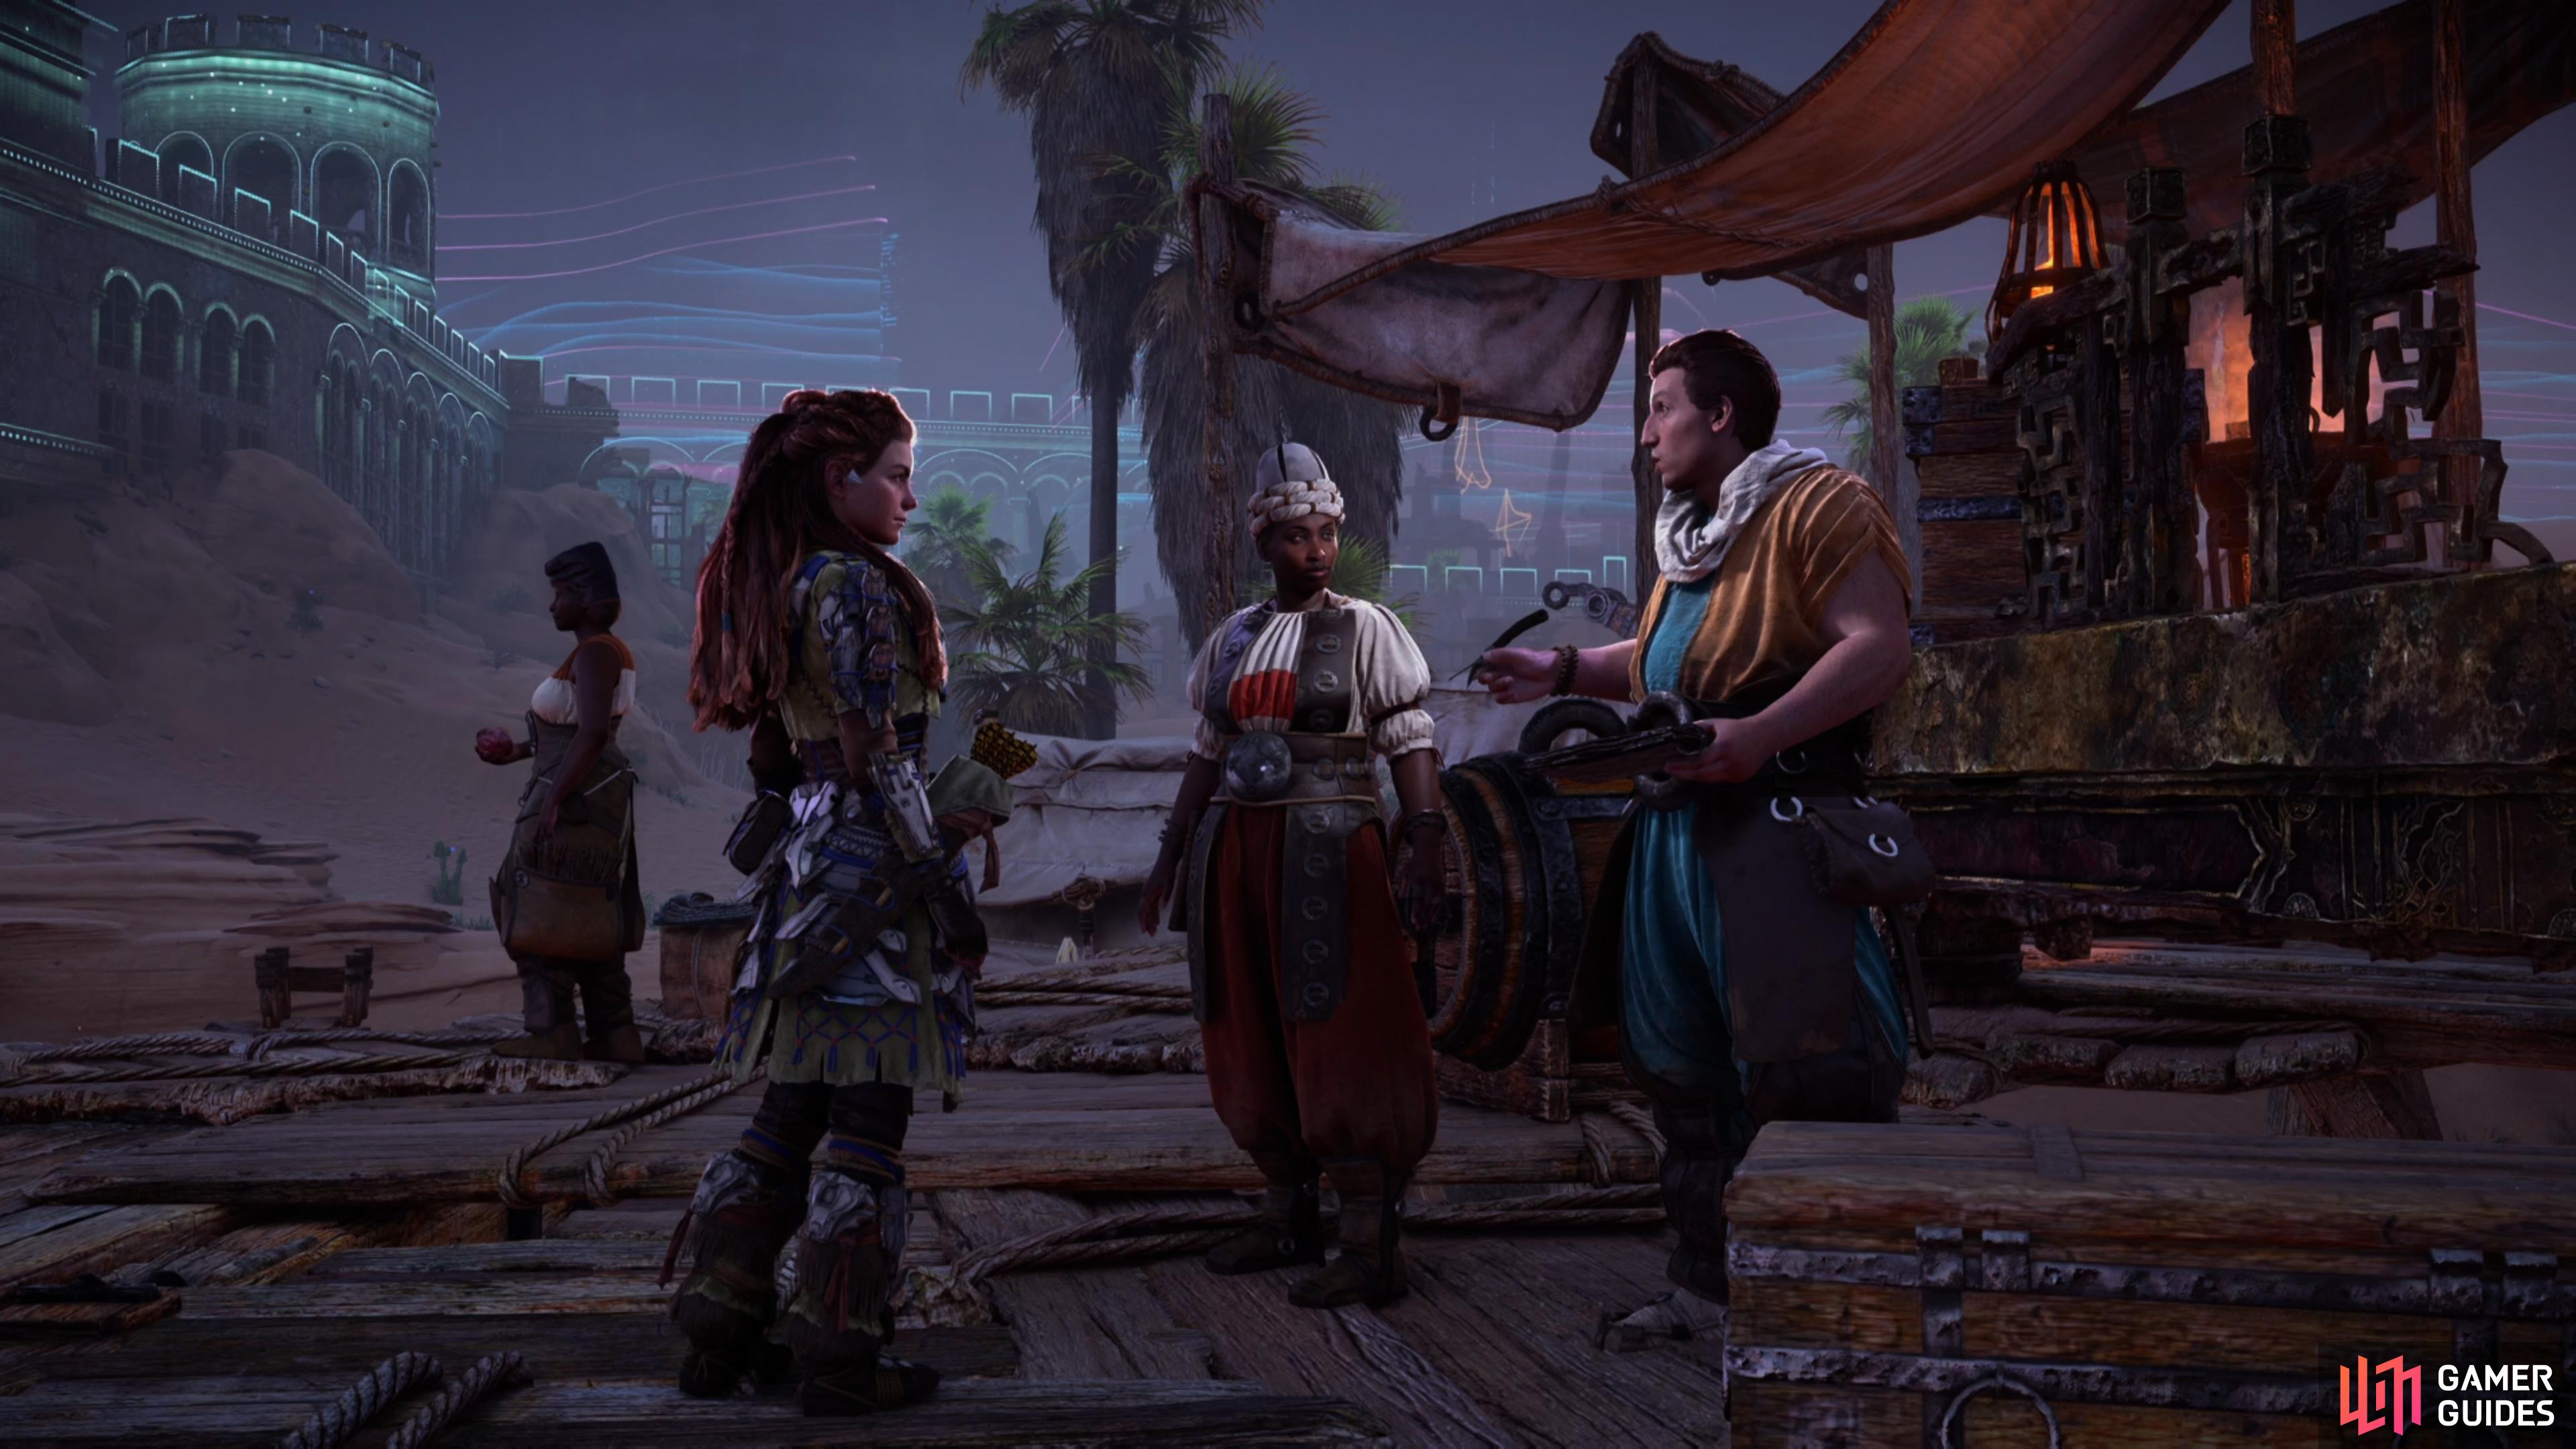 Aloy speaks with Delah and Abadund for the first time.